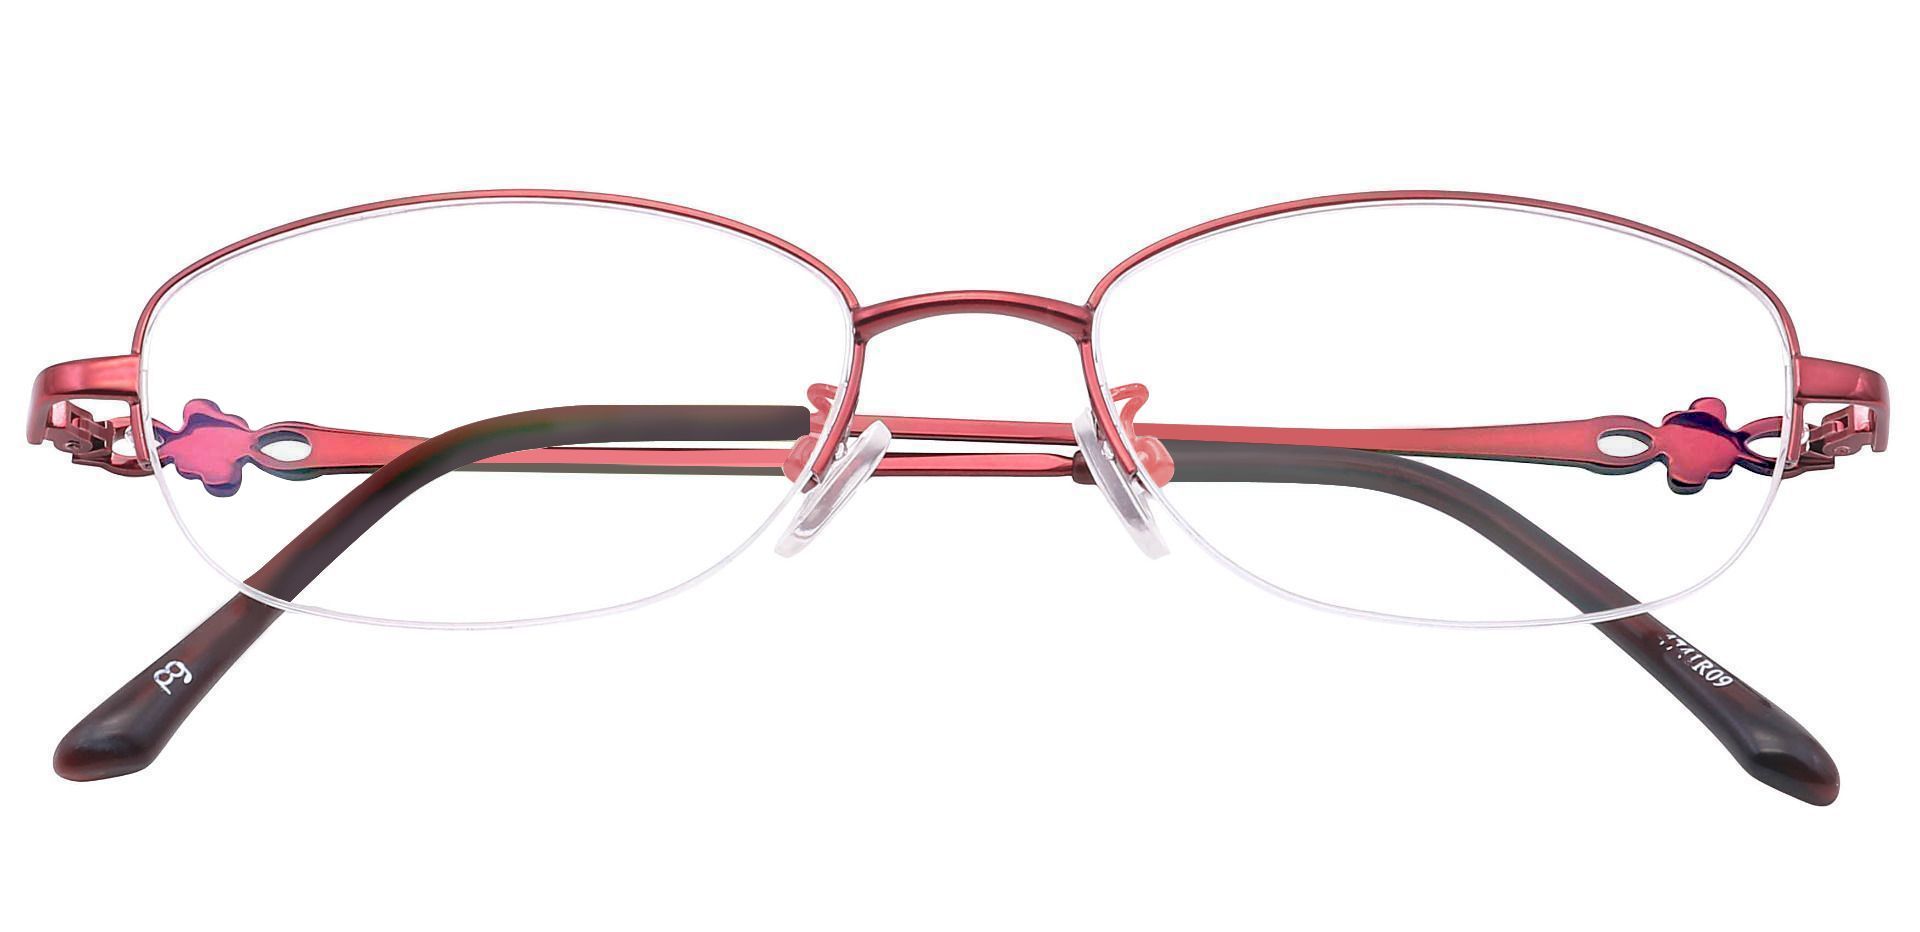 Andie Oval Non-Rx Glasses - Red